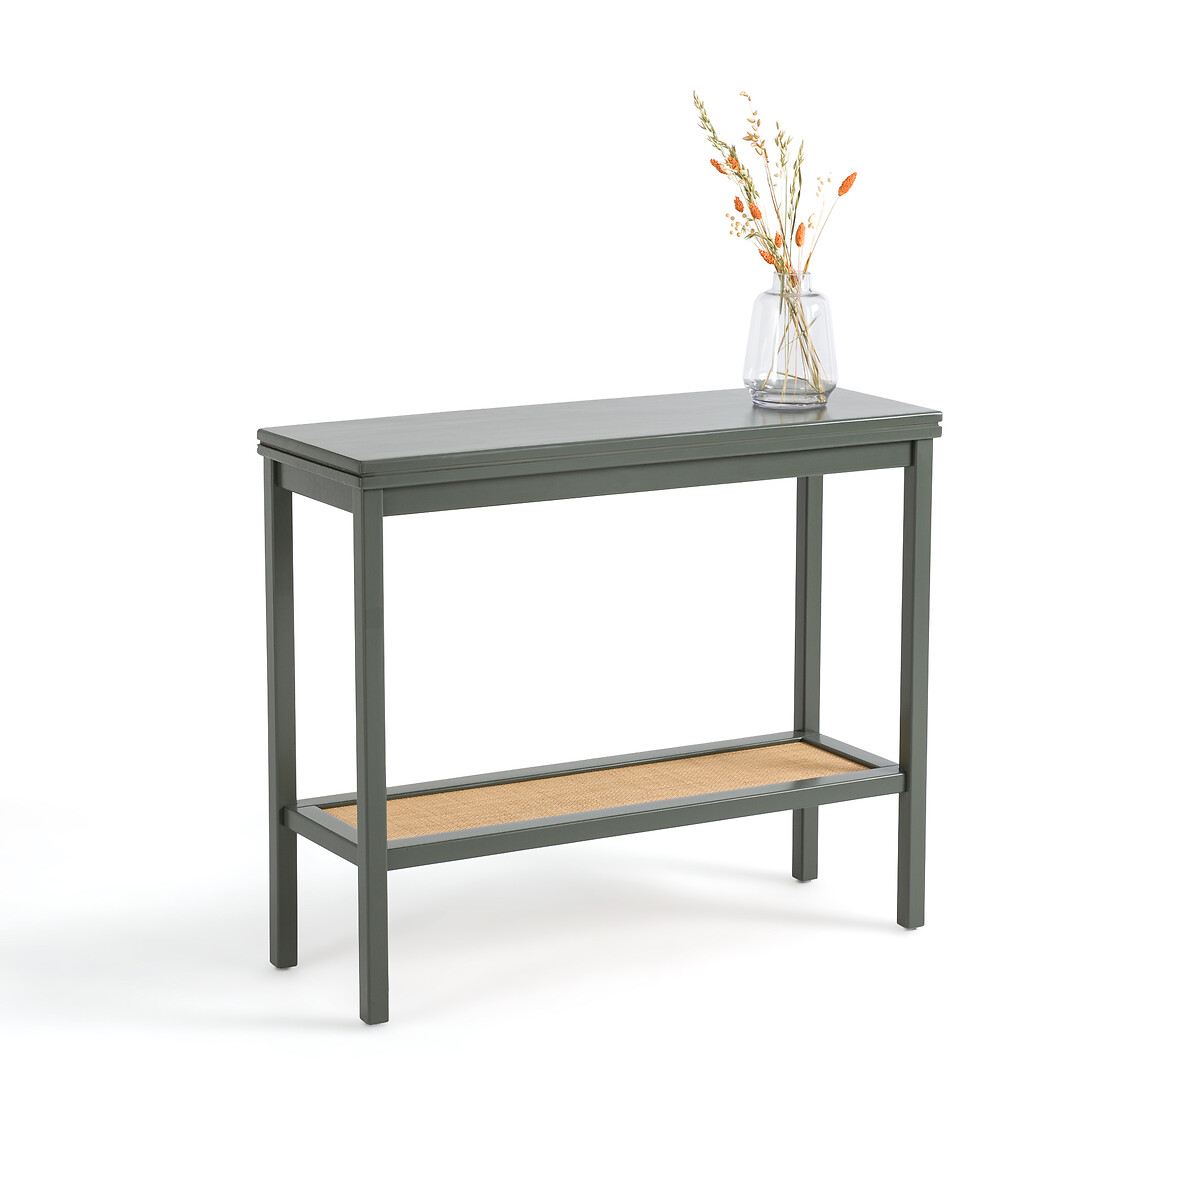 Gabin Solid Pine & Cane Double Level Console Table